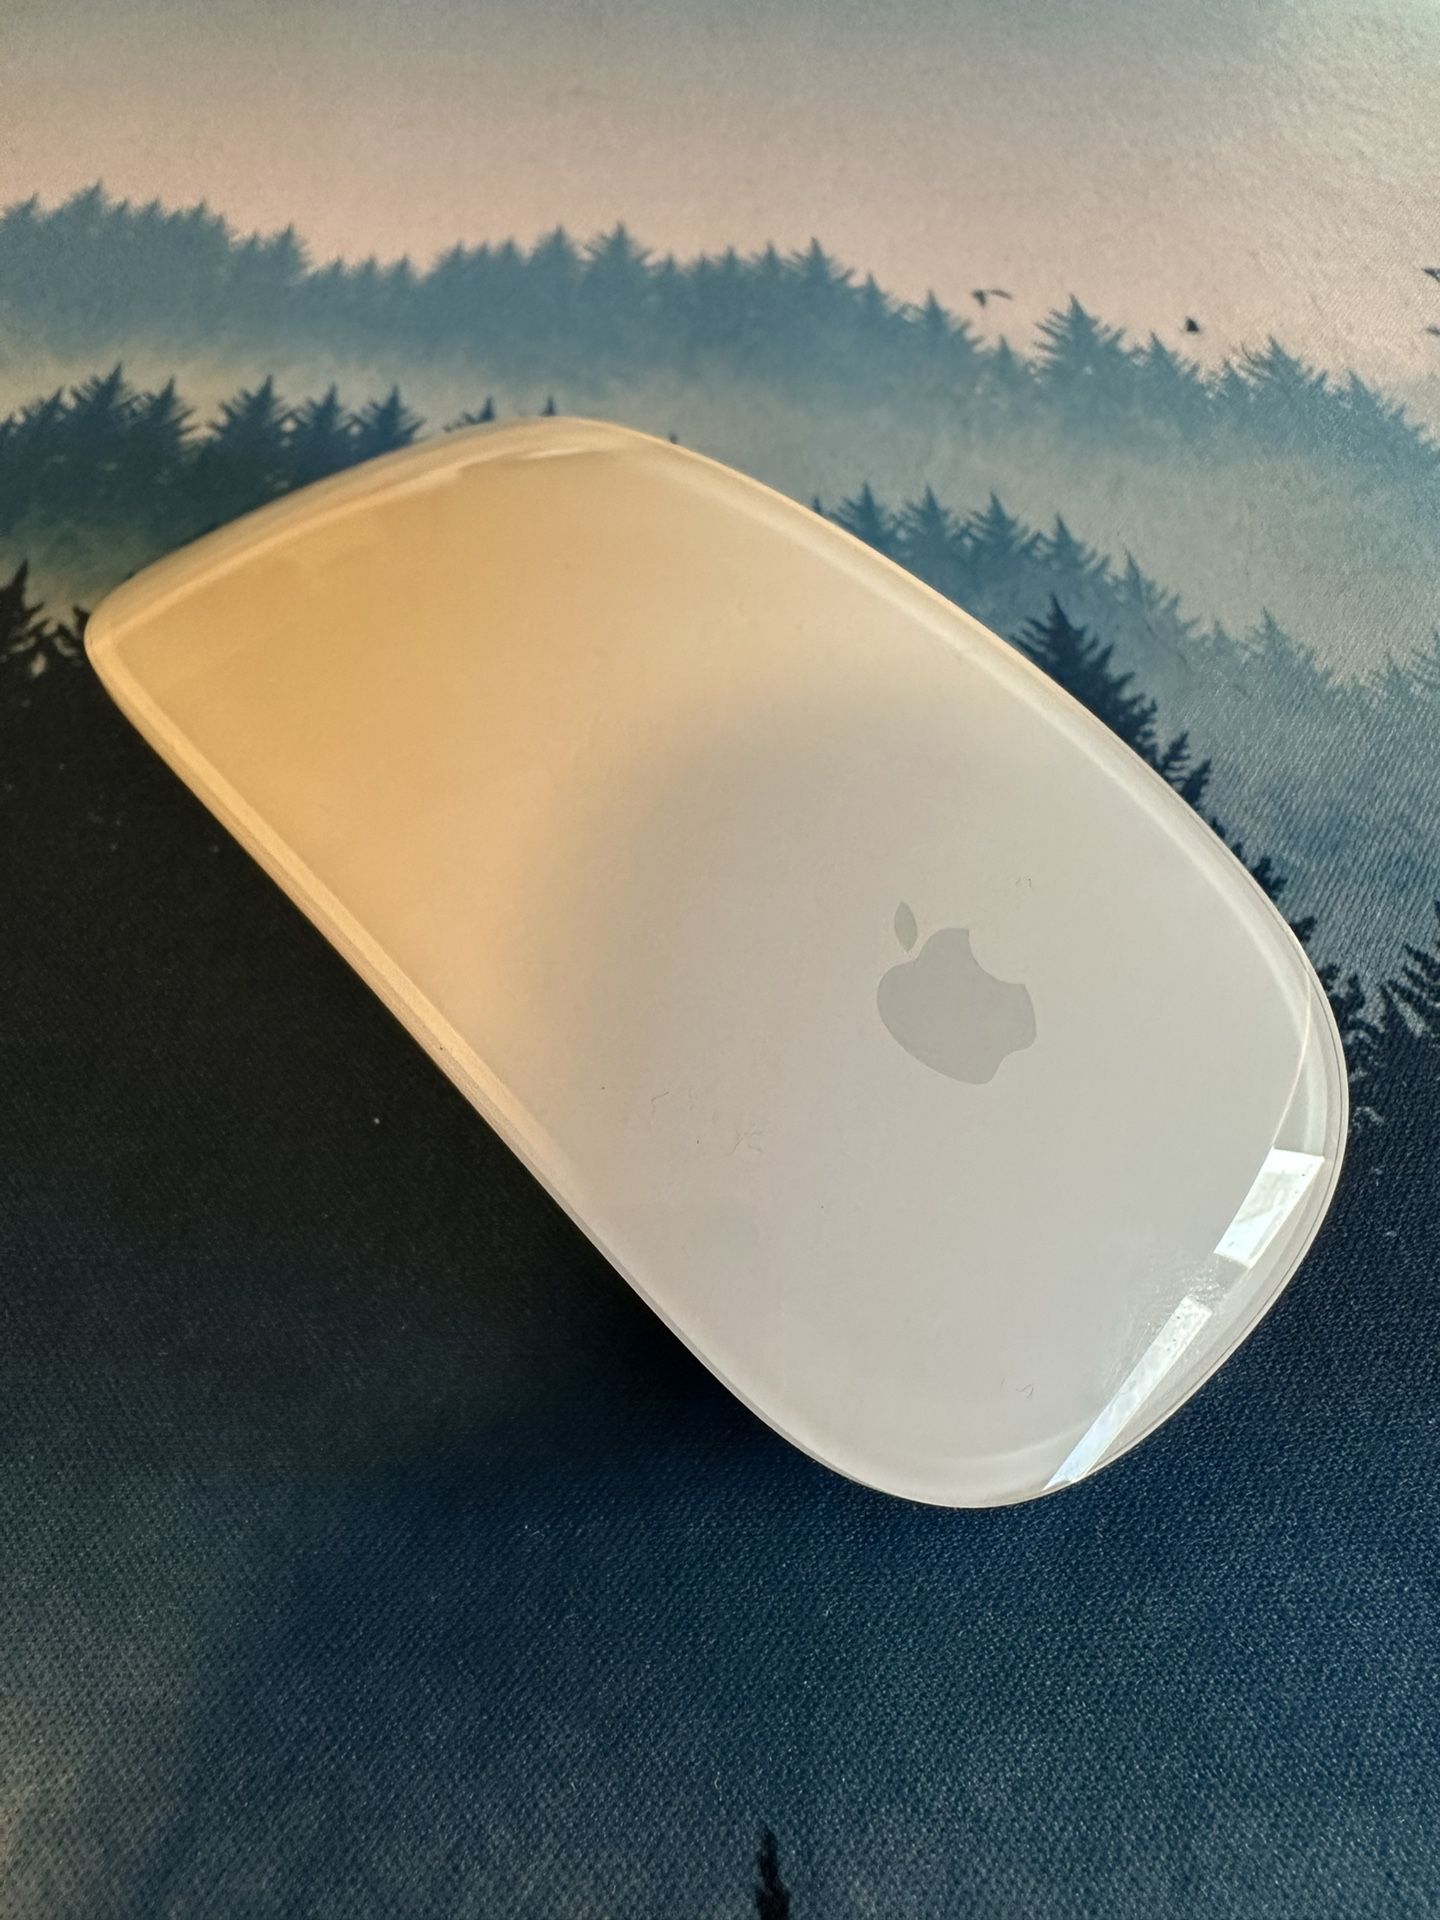 Apple Magic Mouse - White Multi-Touch Surface